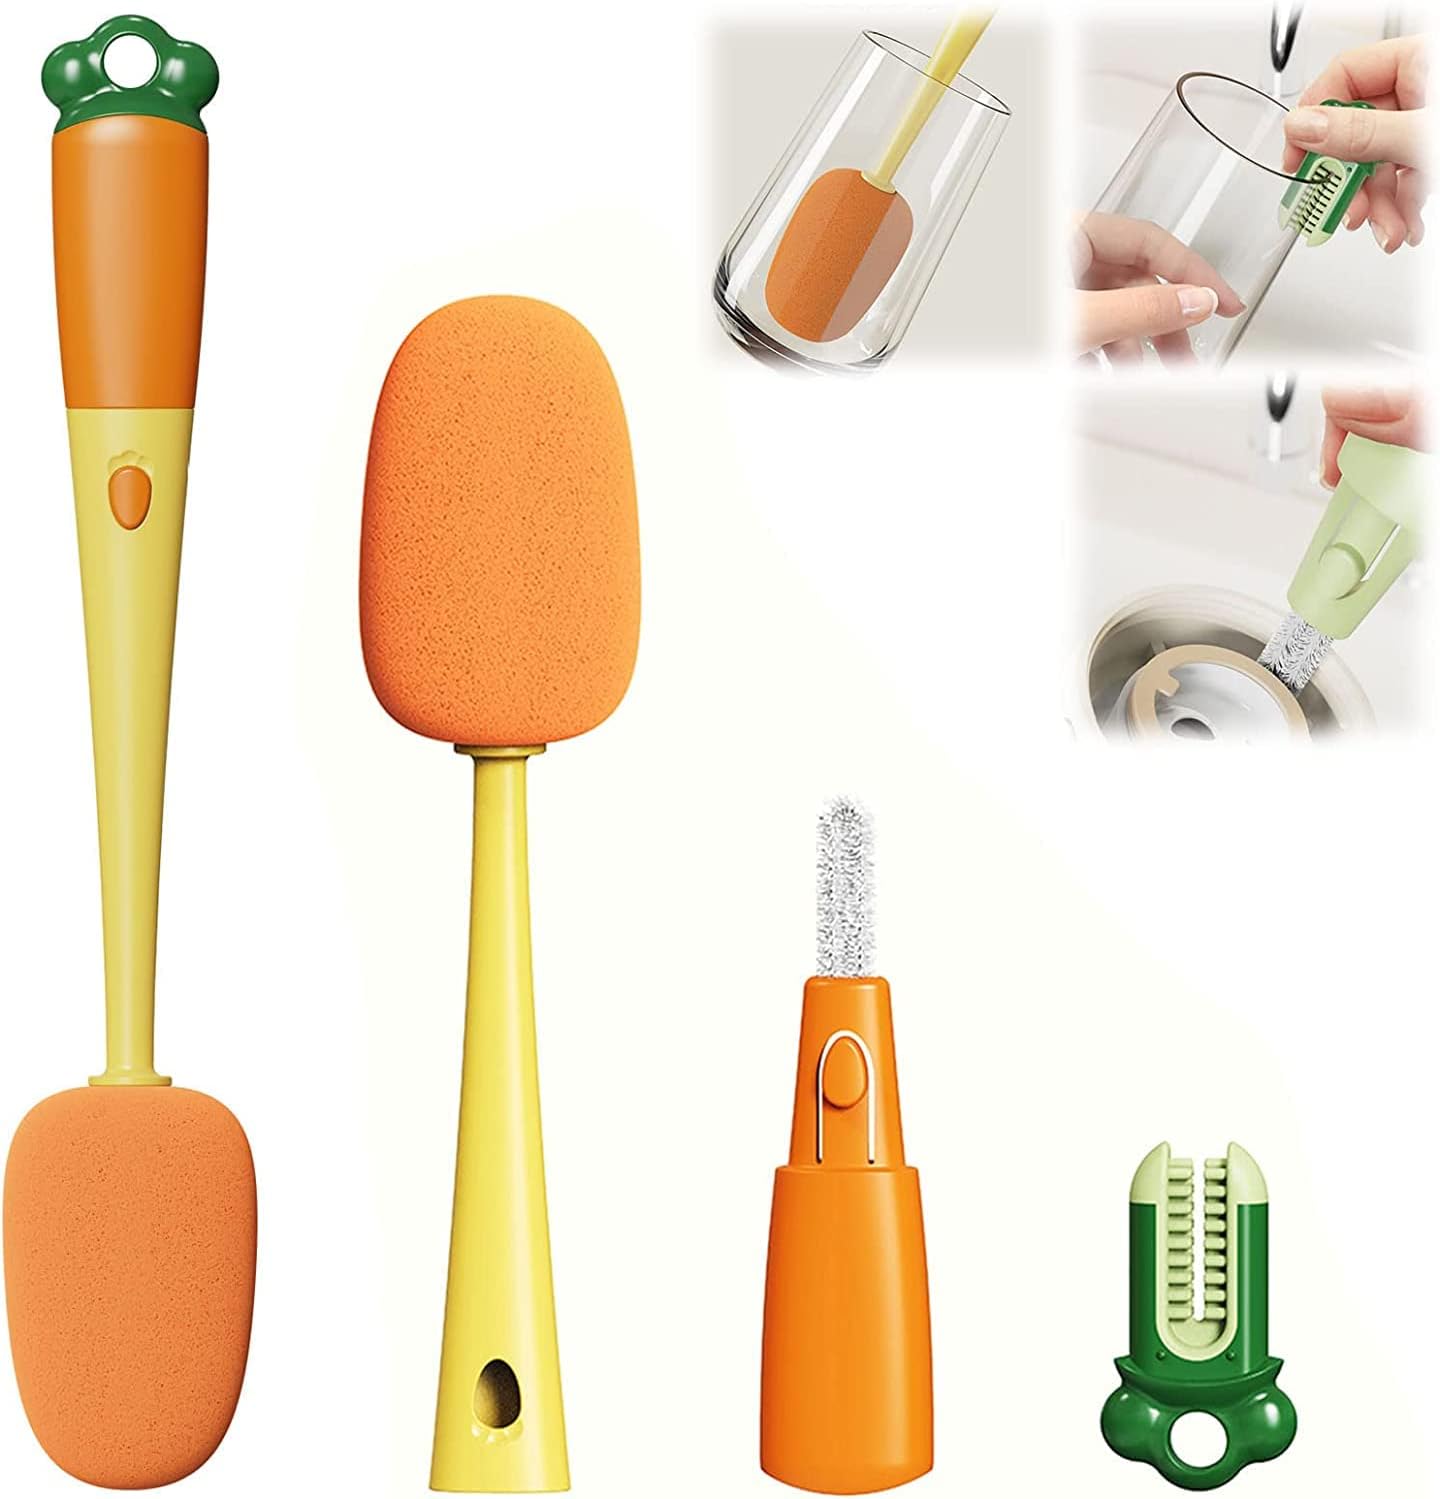 3 in 1 Multi-Functional Crevice Brush Cleaner, Bottle Cup Lid